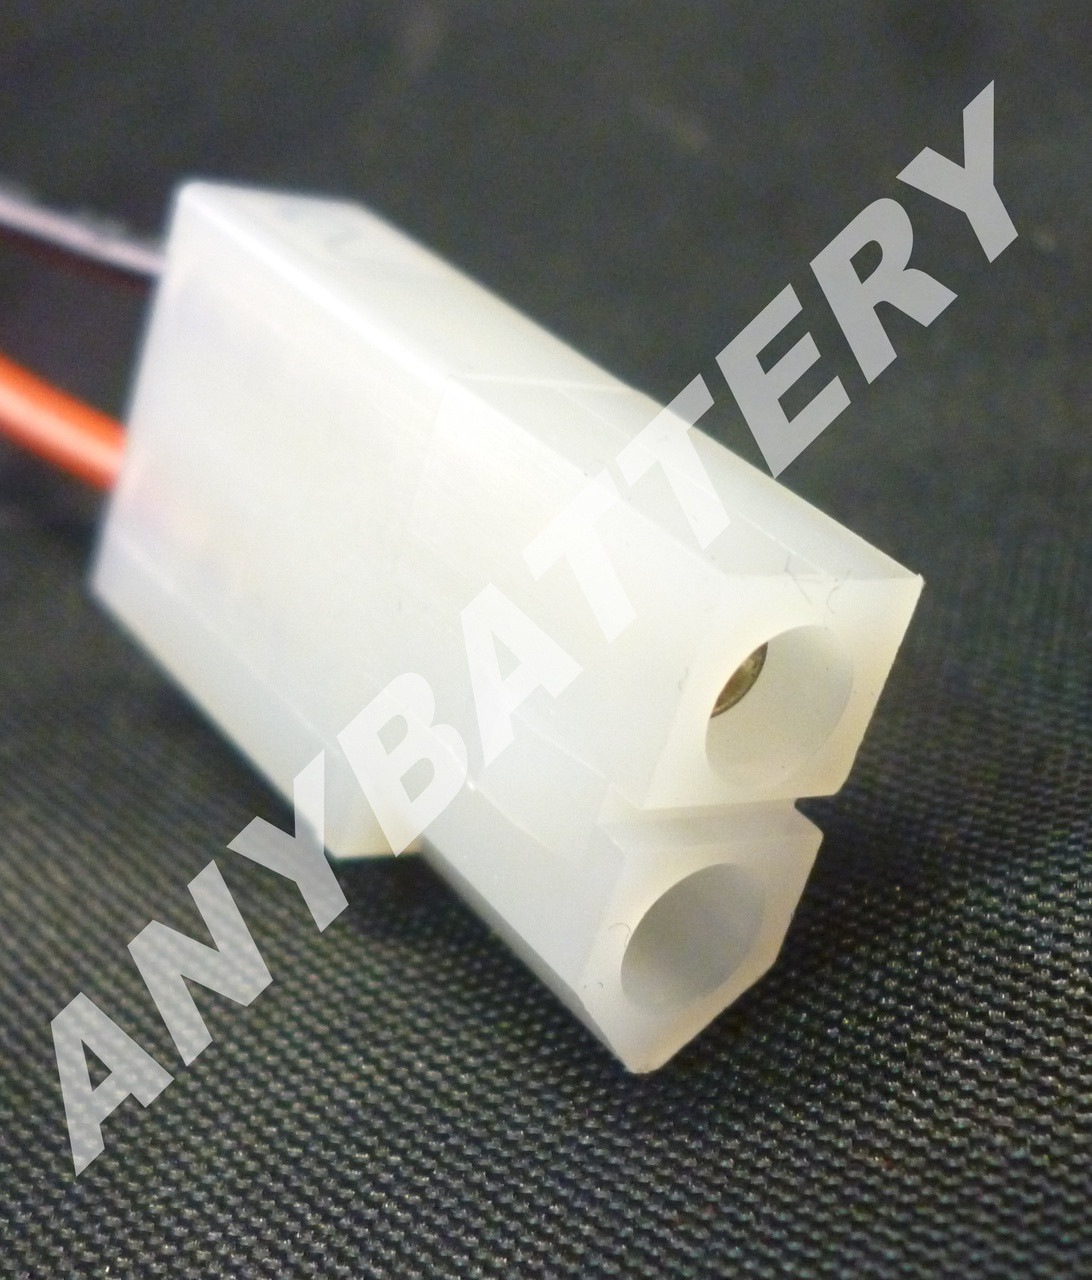 Scale-Tronix 20009 Battery Connector